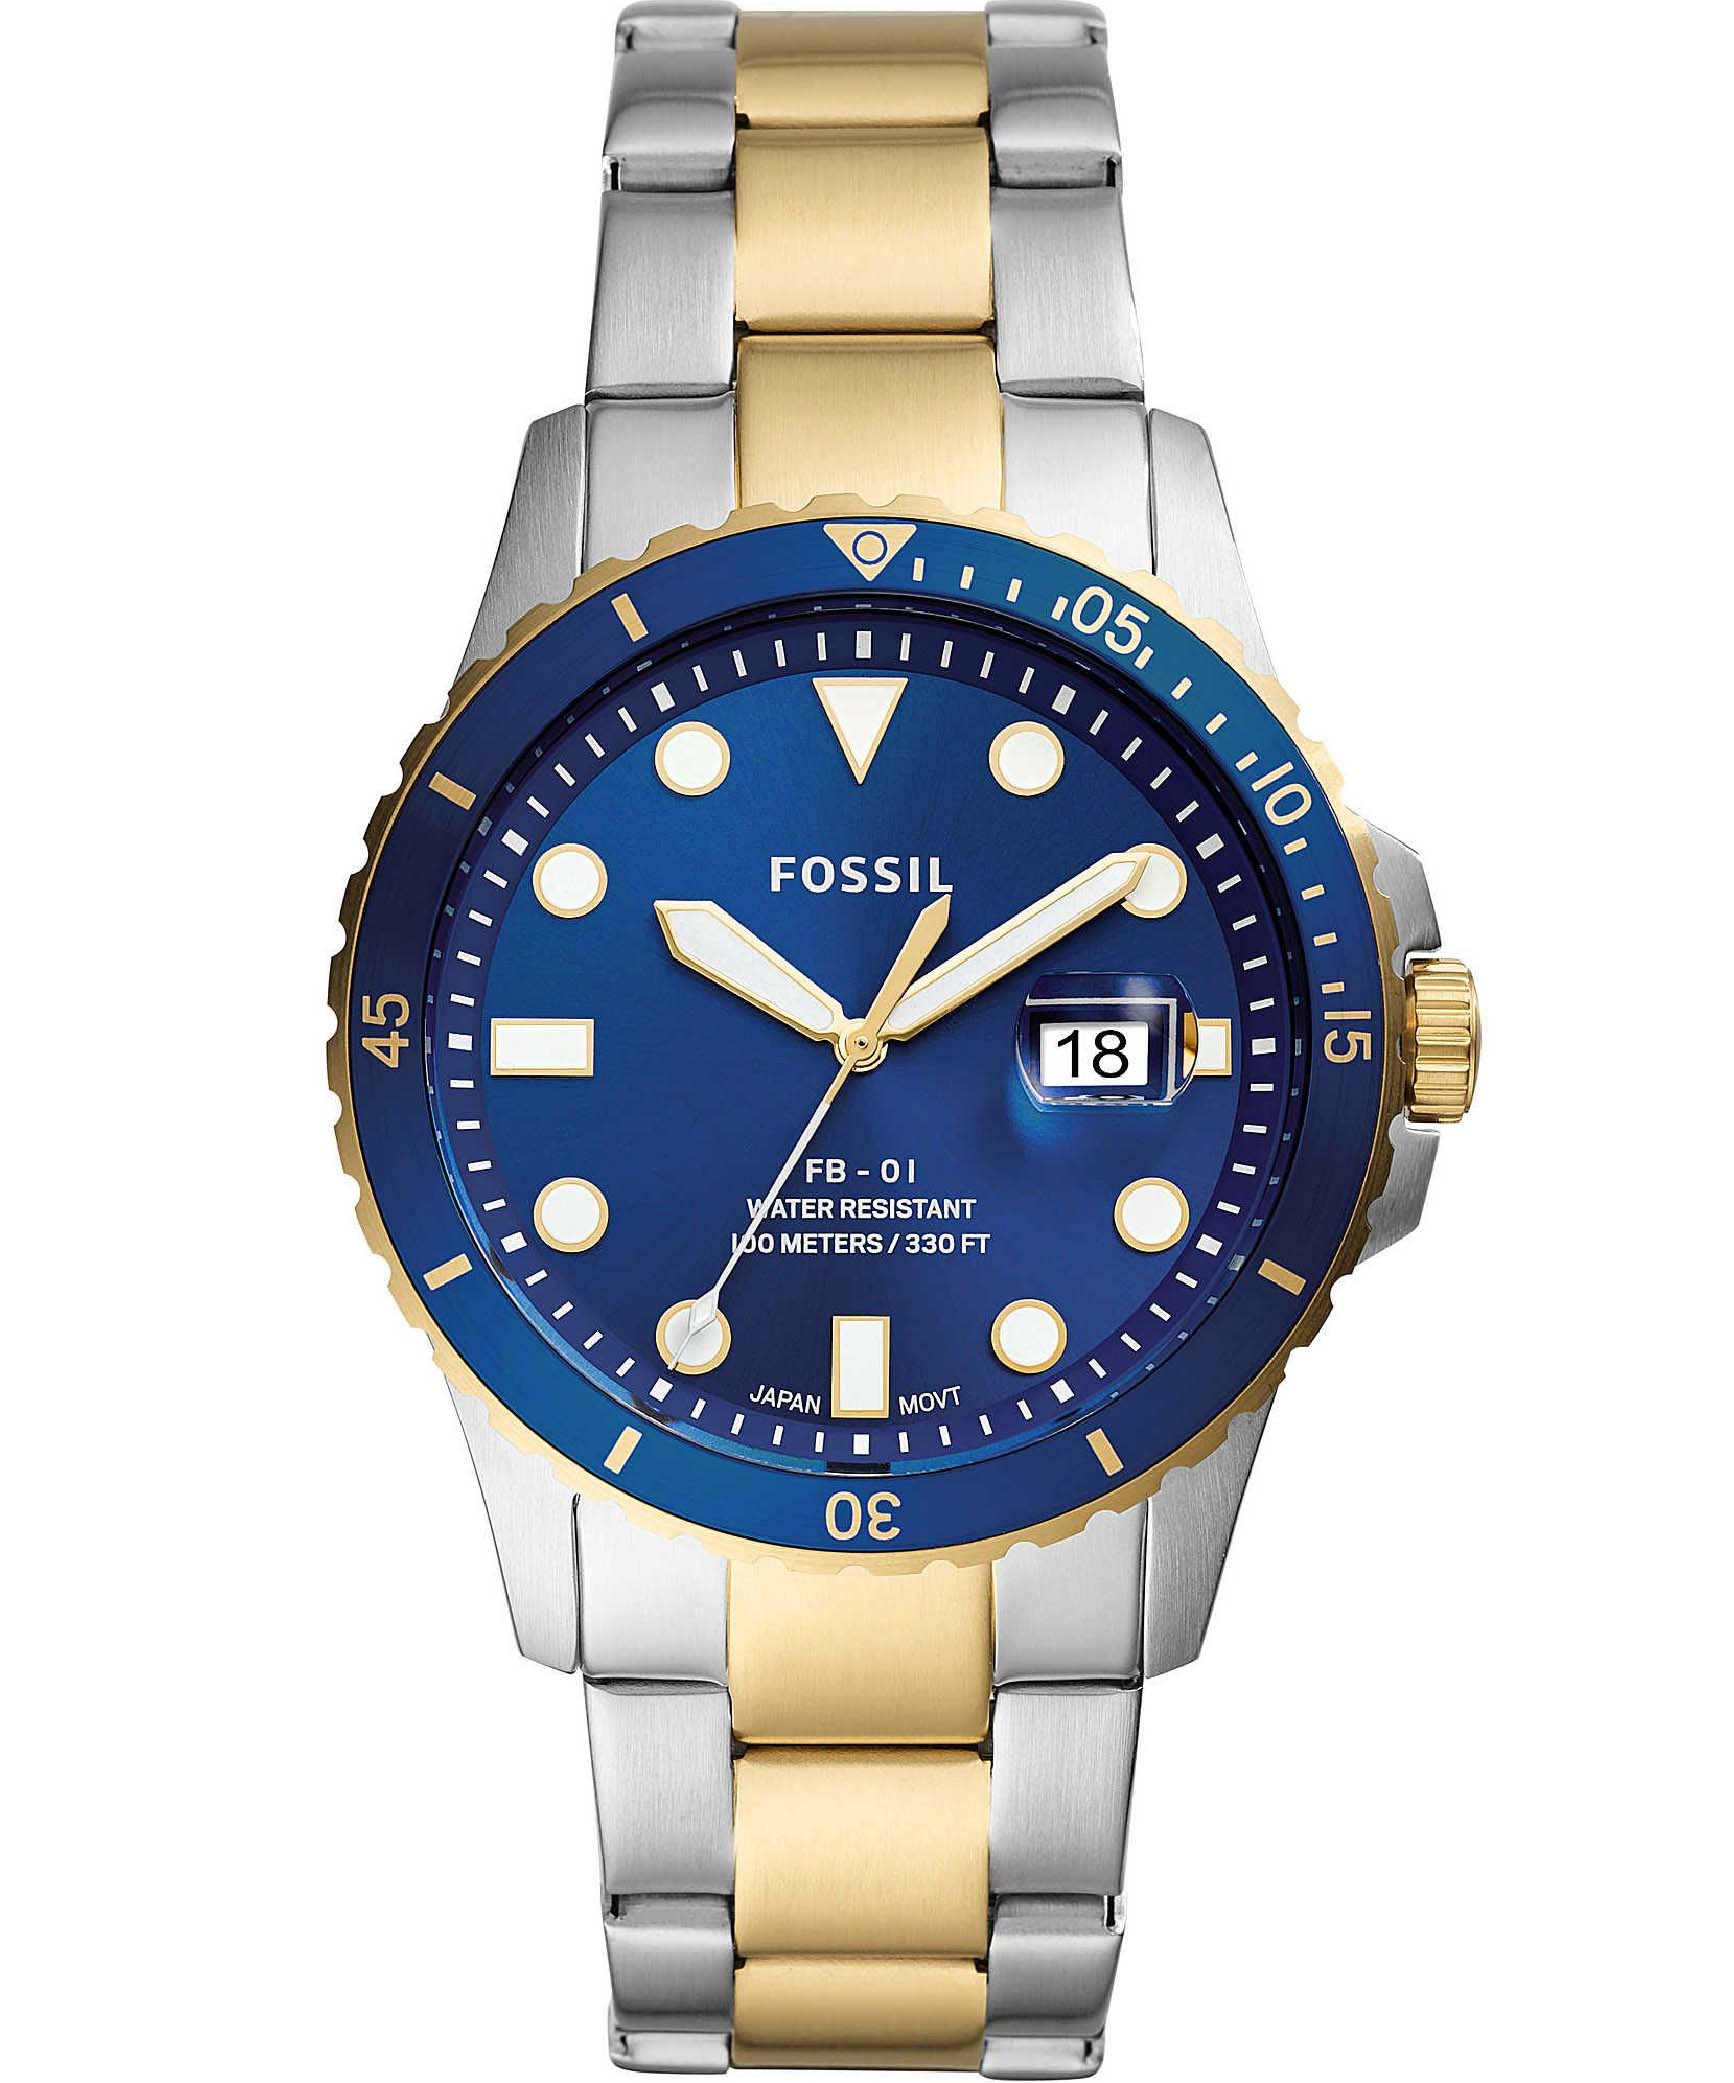 Fossil Men's Watch Analog, FB-01 Blue Dial Silver & Gold Stainless Steel Band, FW-FS5742